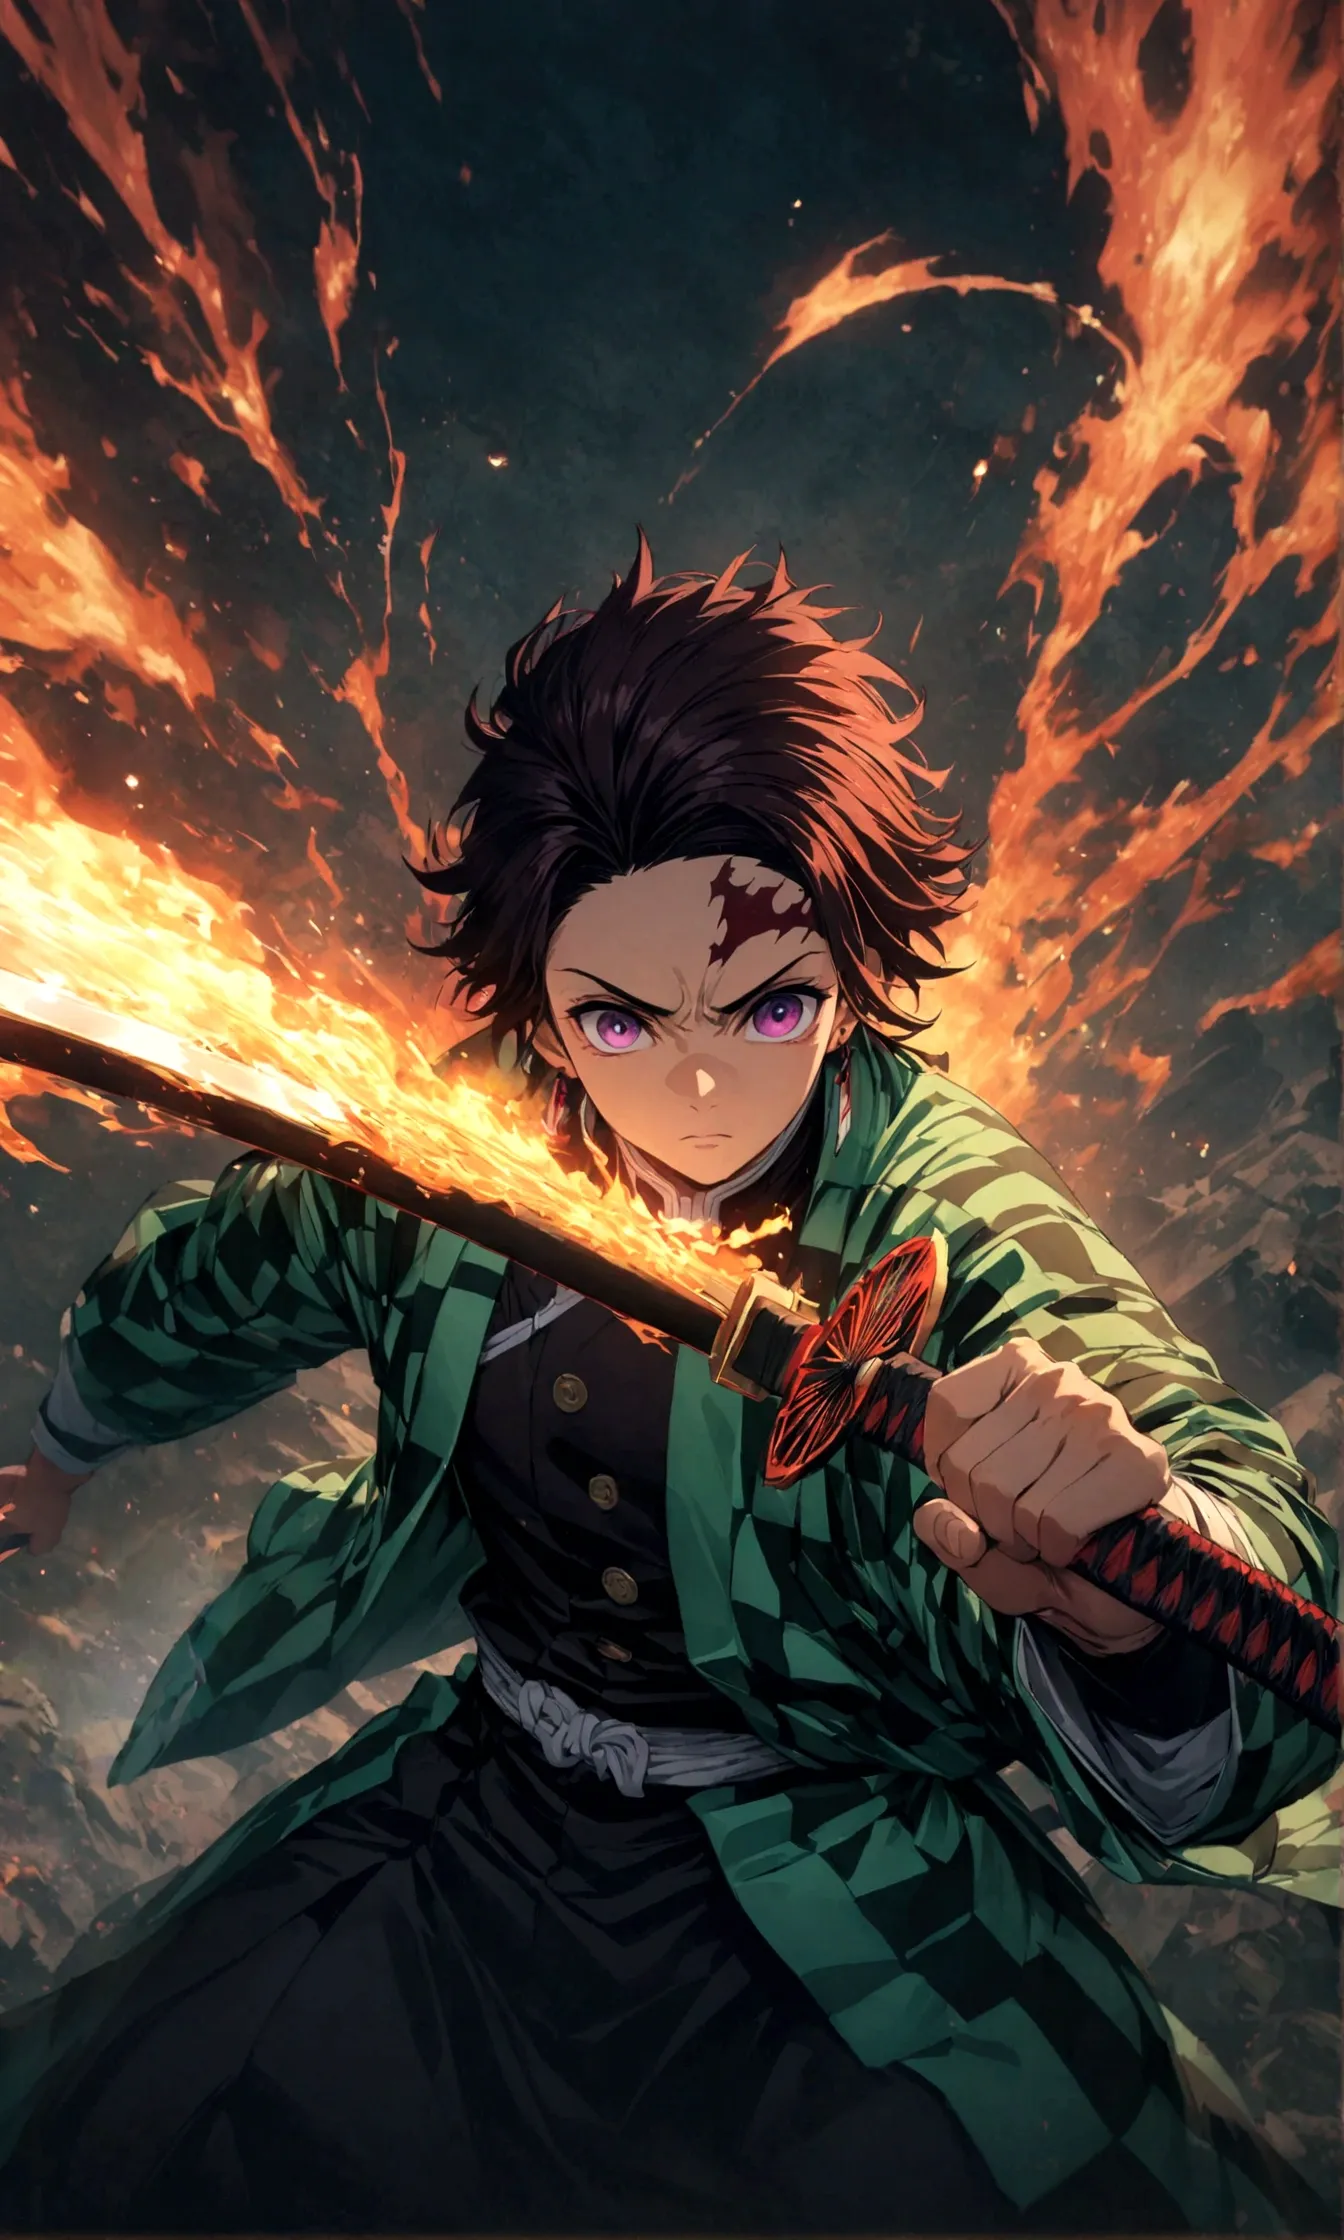 Fixes,(1 male,tanjiro kamado),Demon slayer,Tanjiro&#39;Costume,Holding a Japanese sword,Water and fire effects,Intricate details...